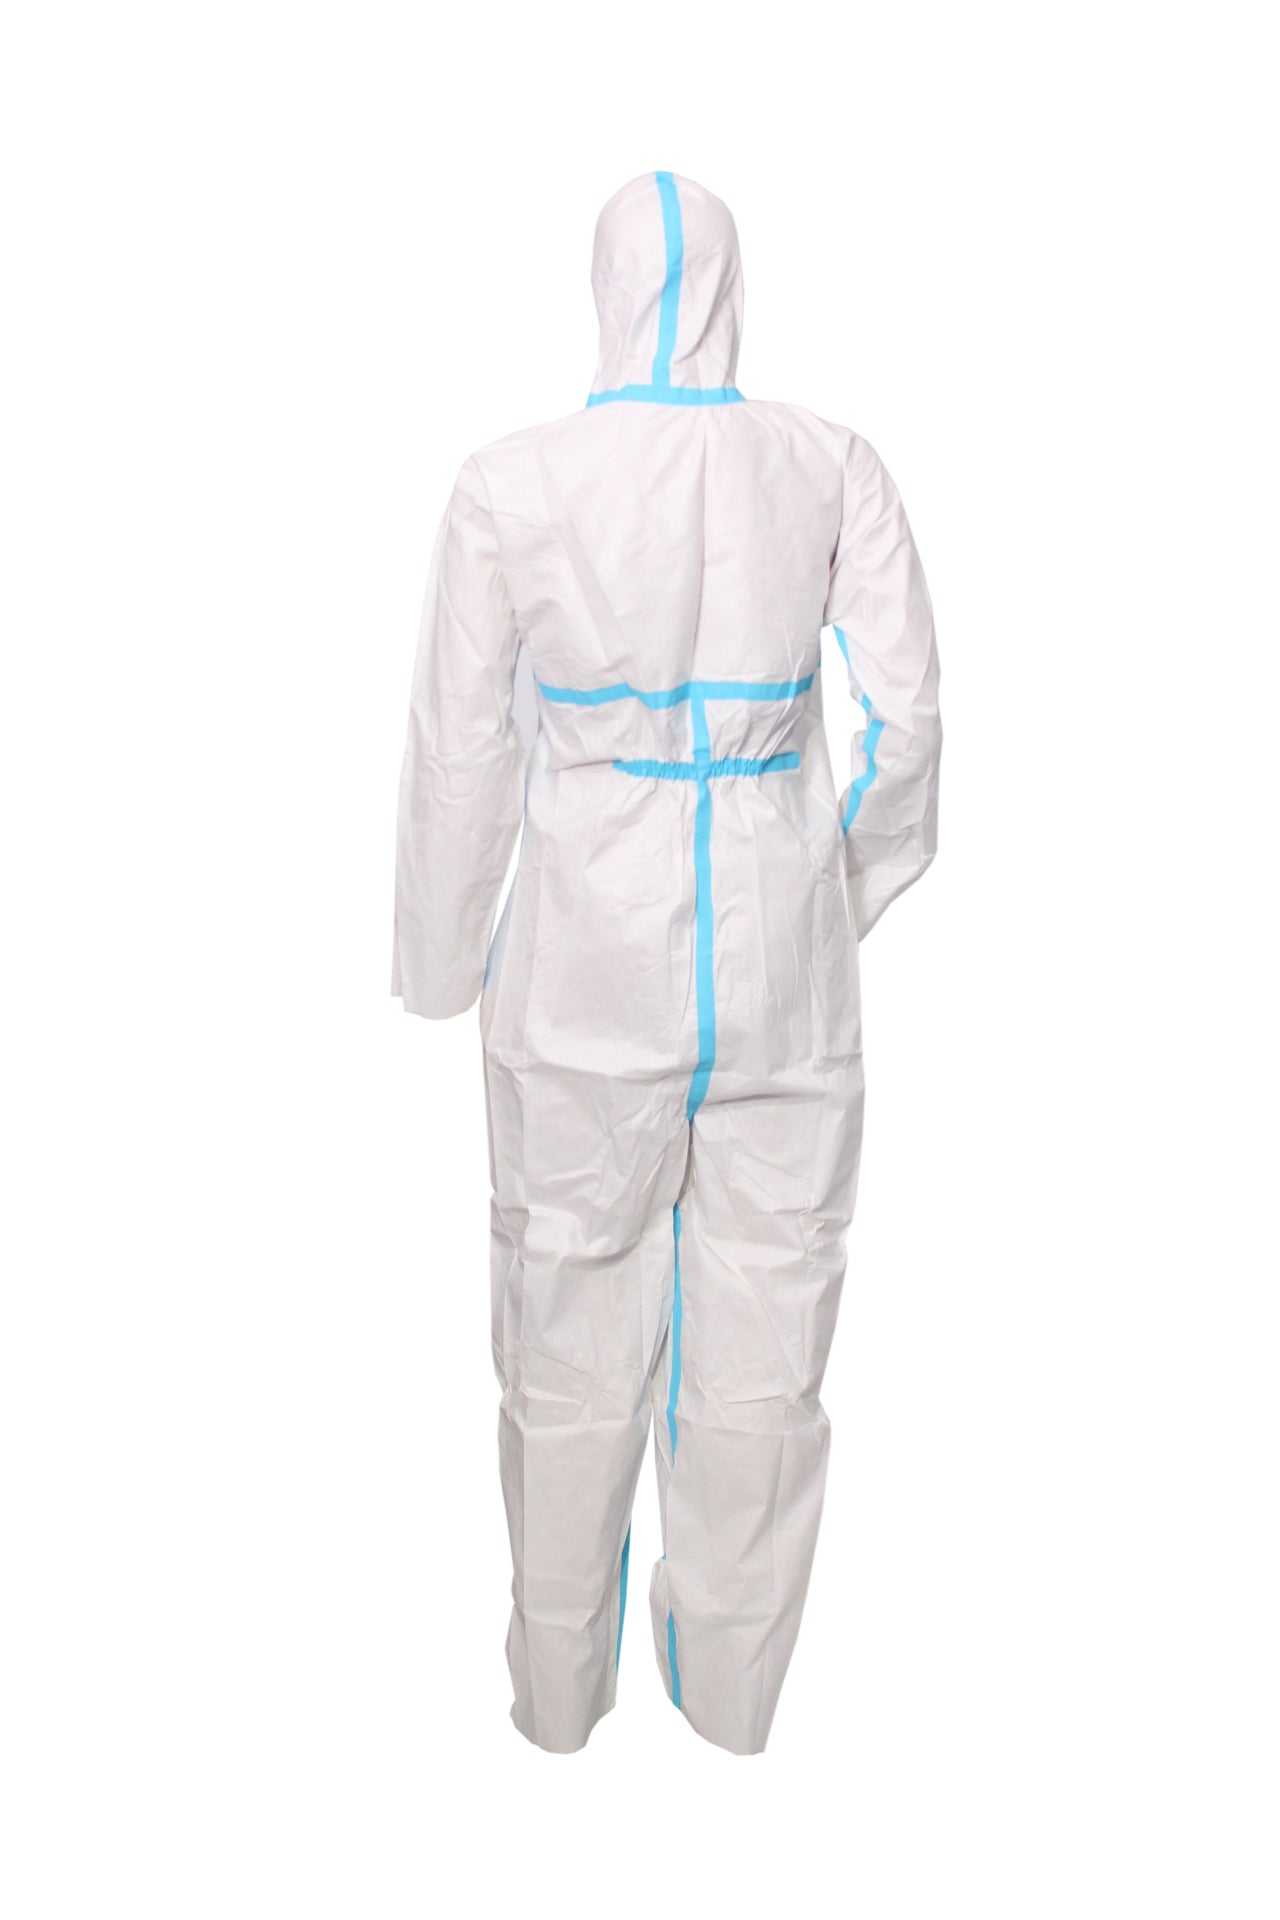 Type 5/6 Medical Coveralls